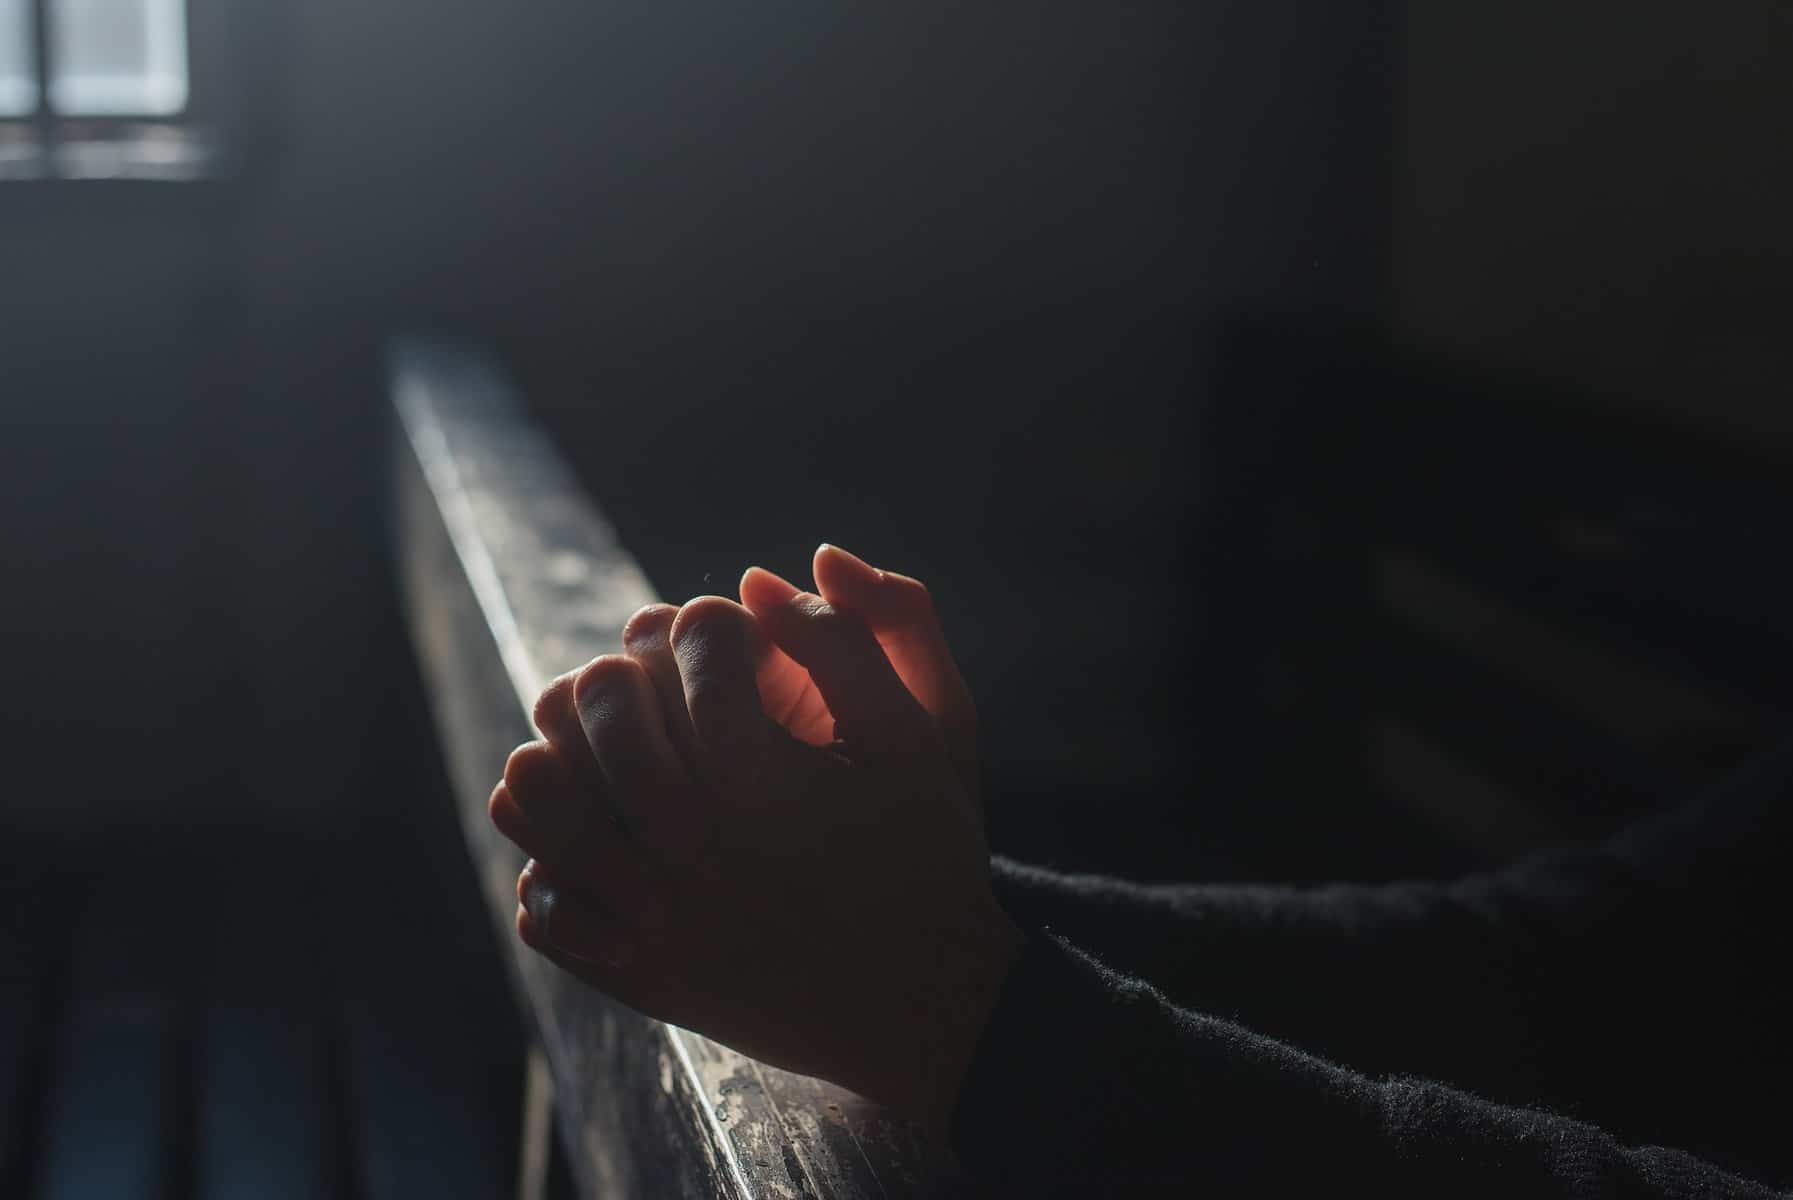 Hands are clasped in prayer at an altar rail with sunlight backlighting them through a window.